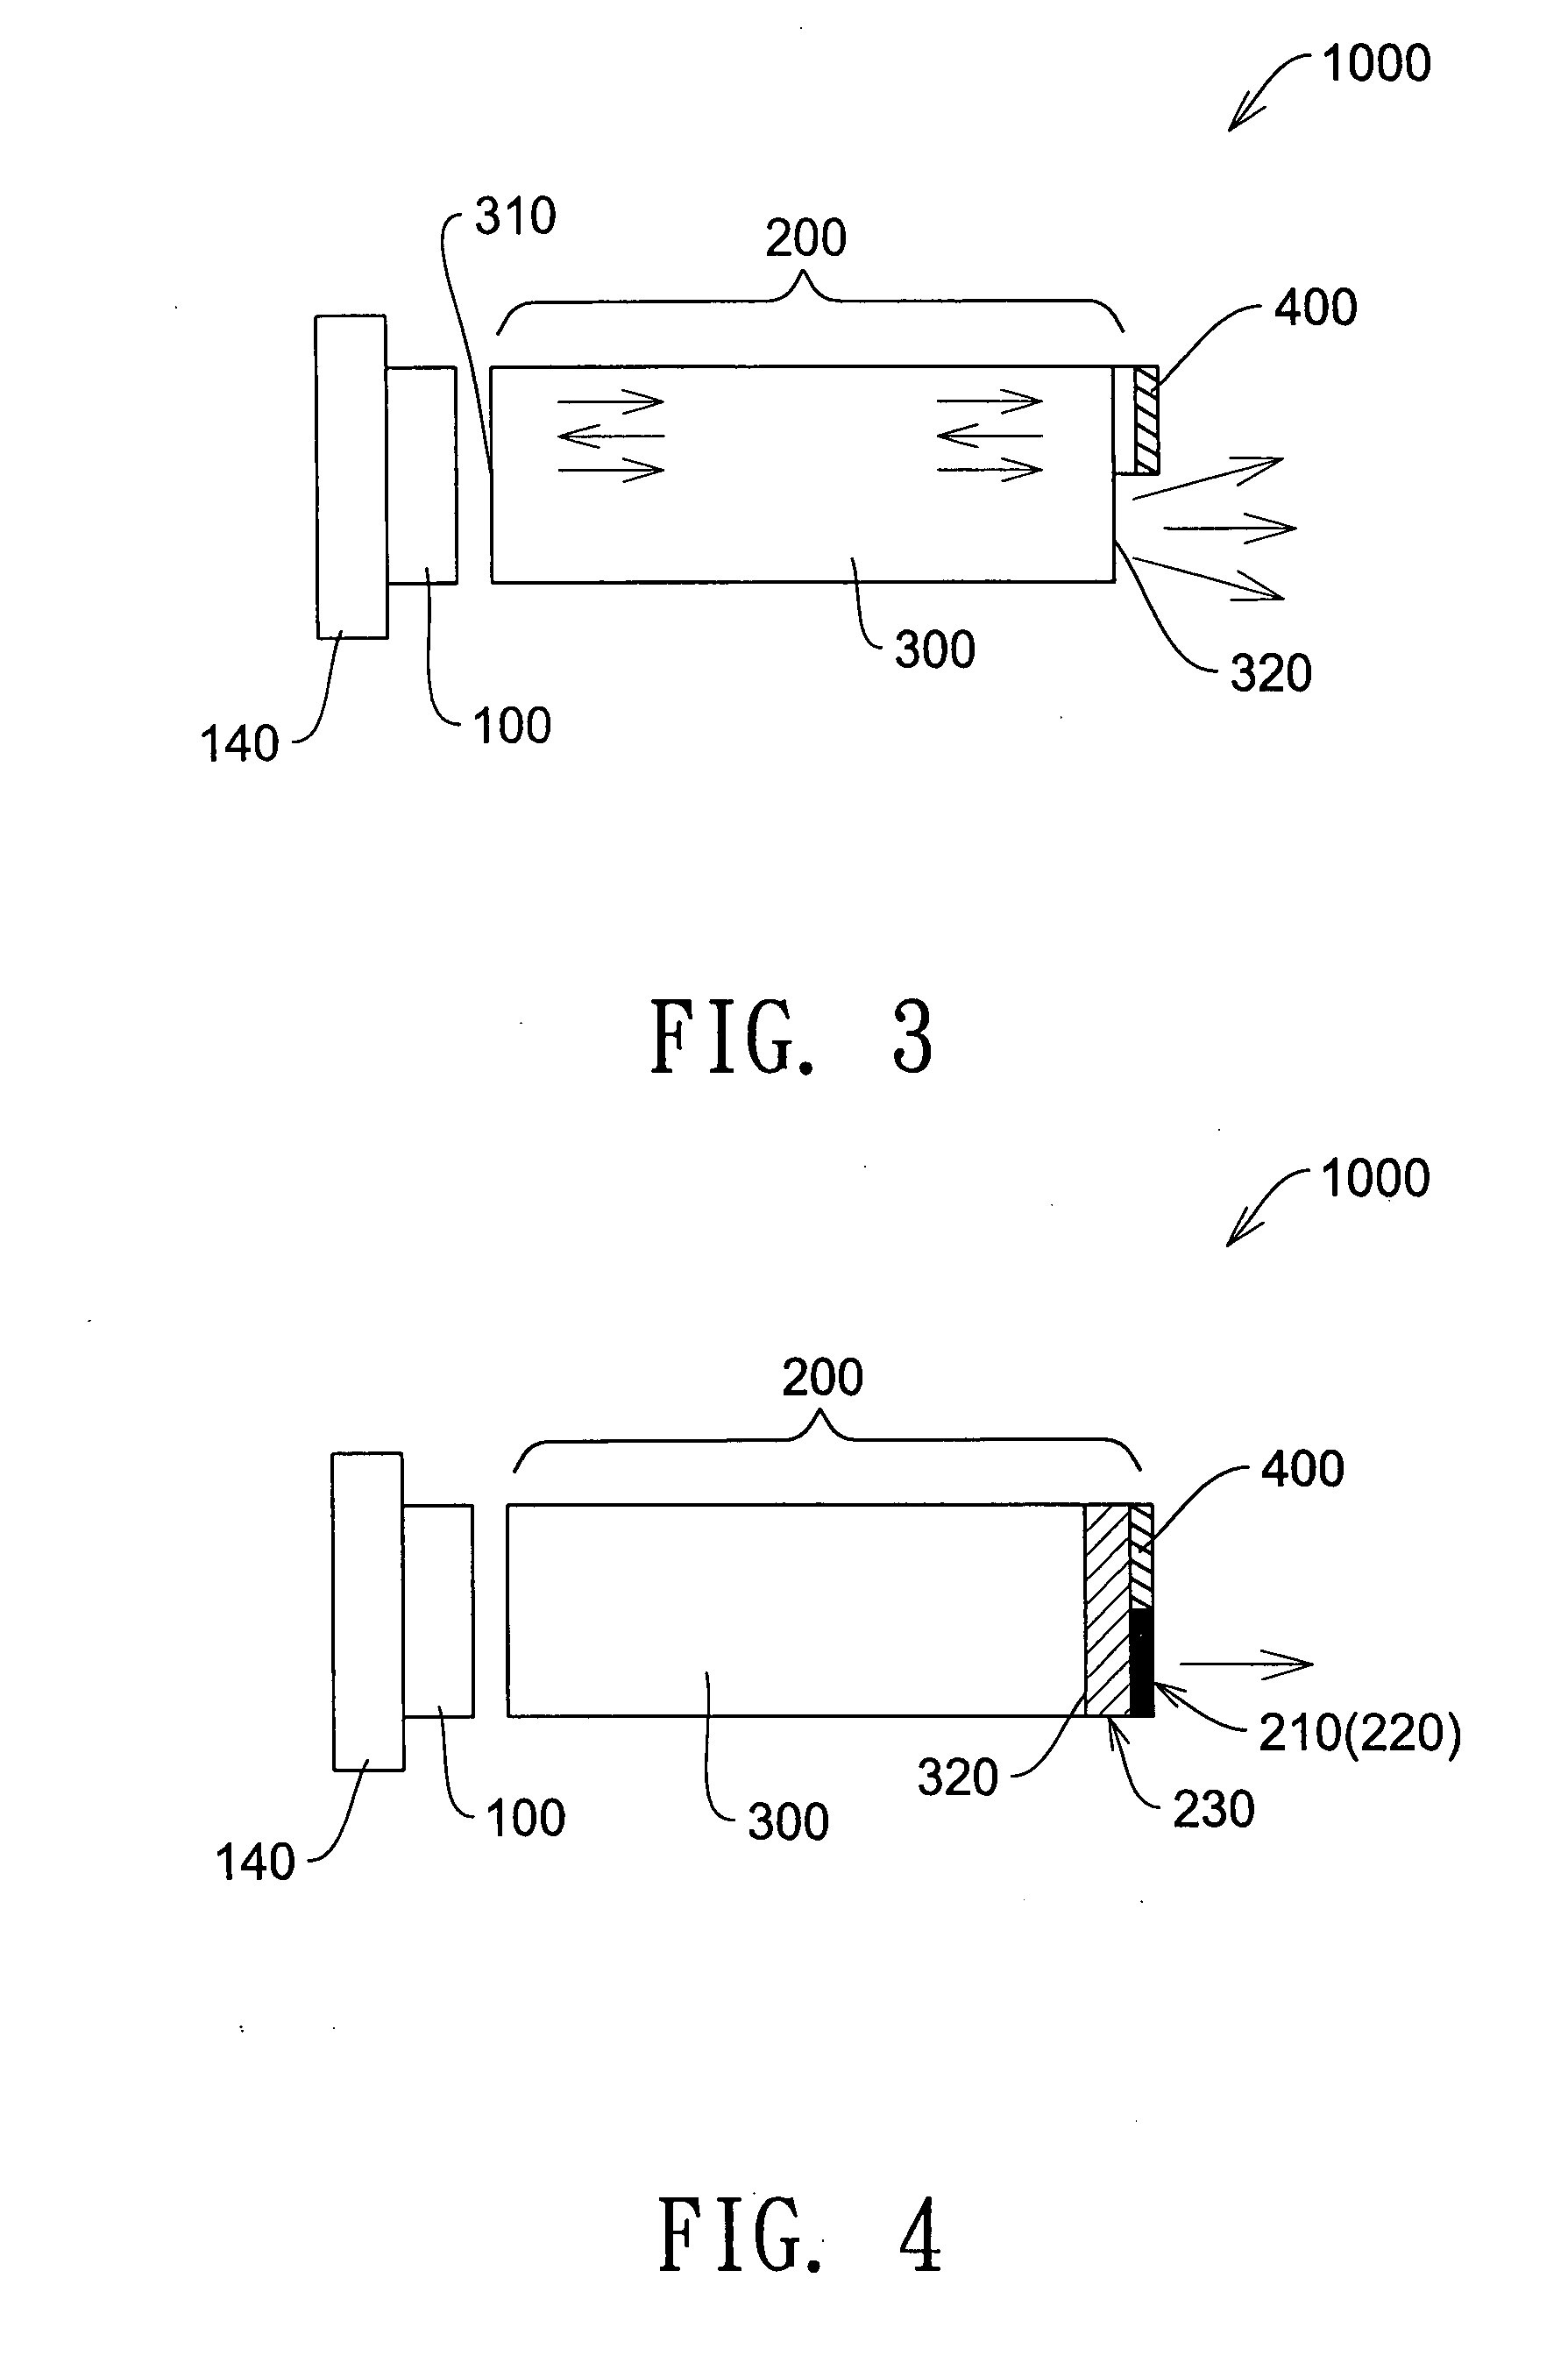 Illumination system and method for recycling light to increase the brightness of the light source